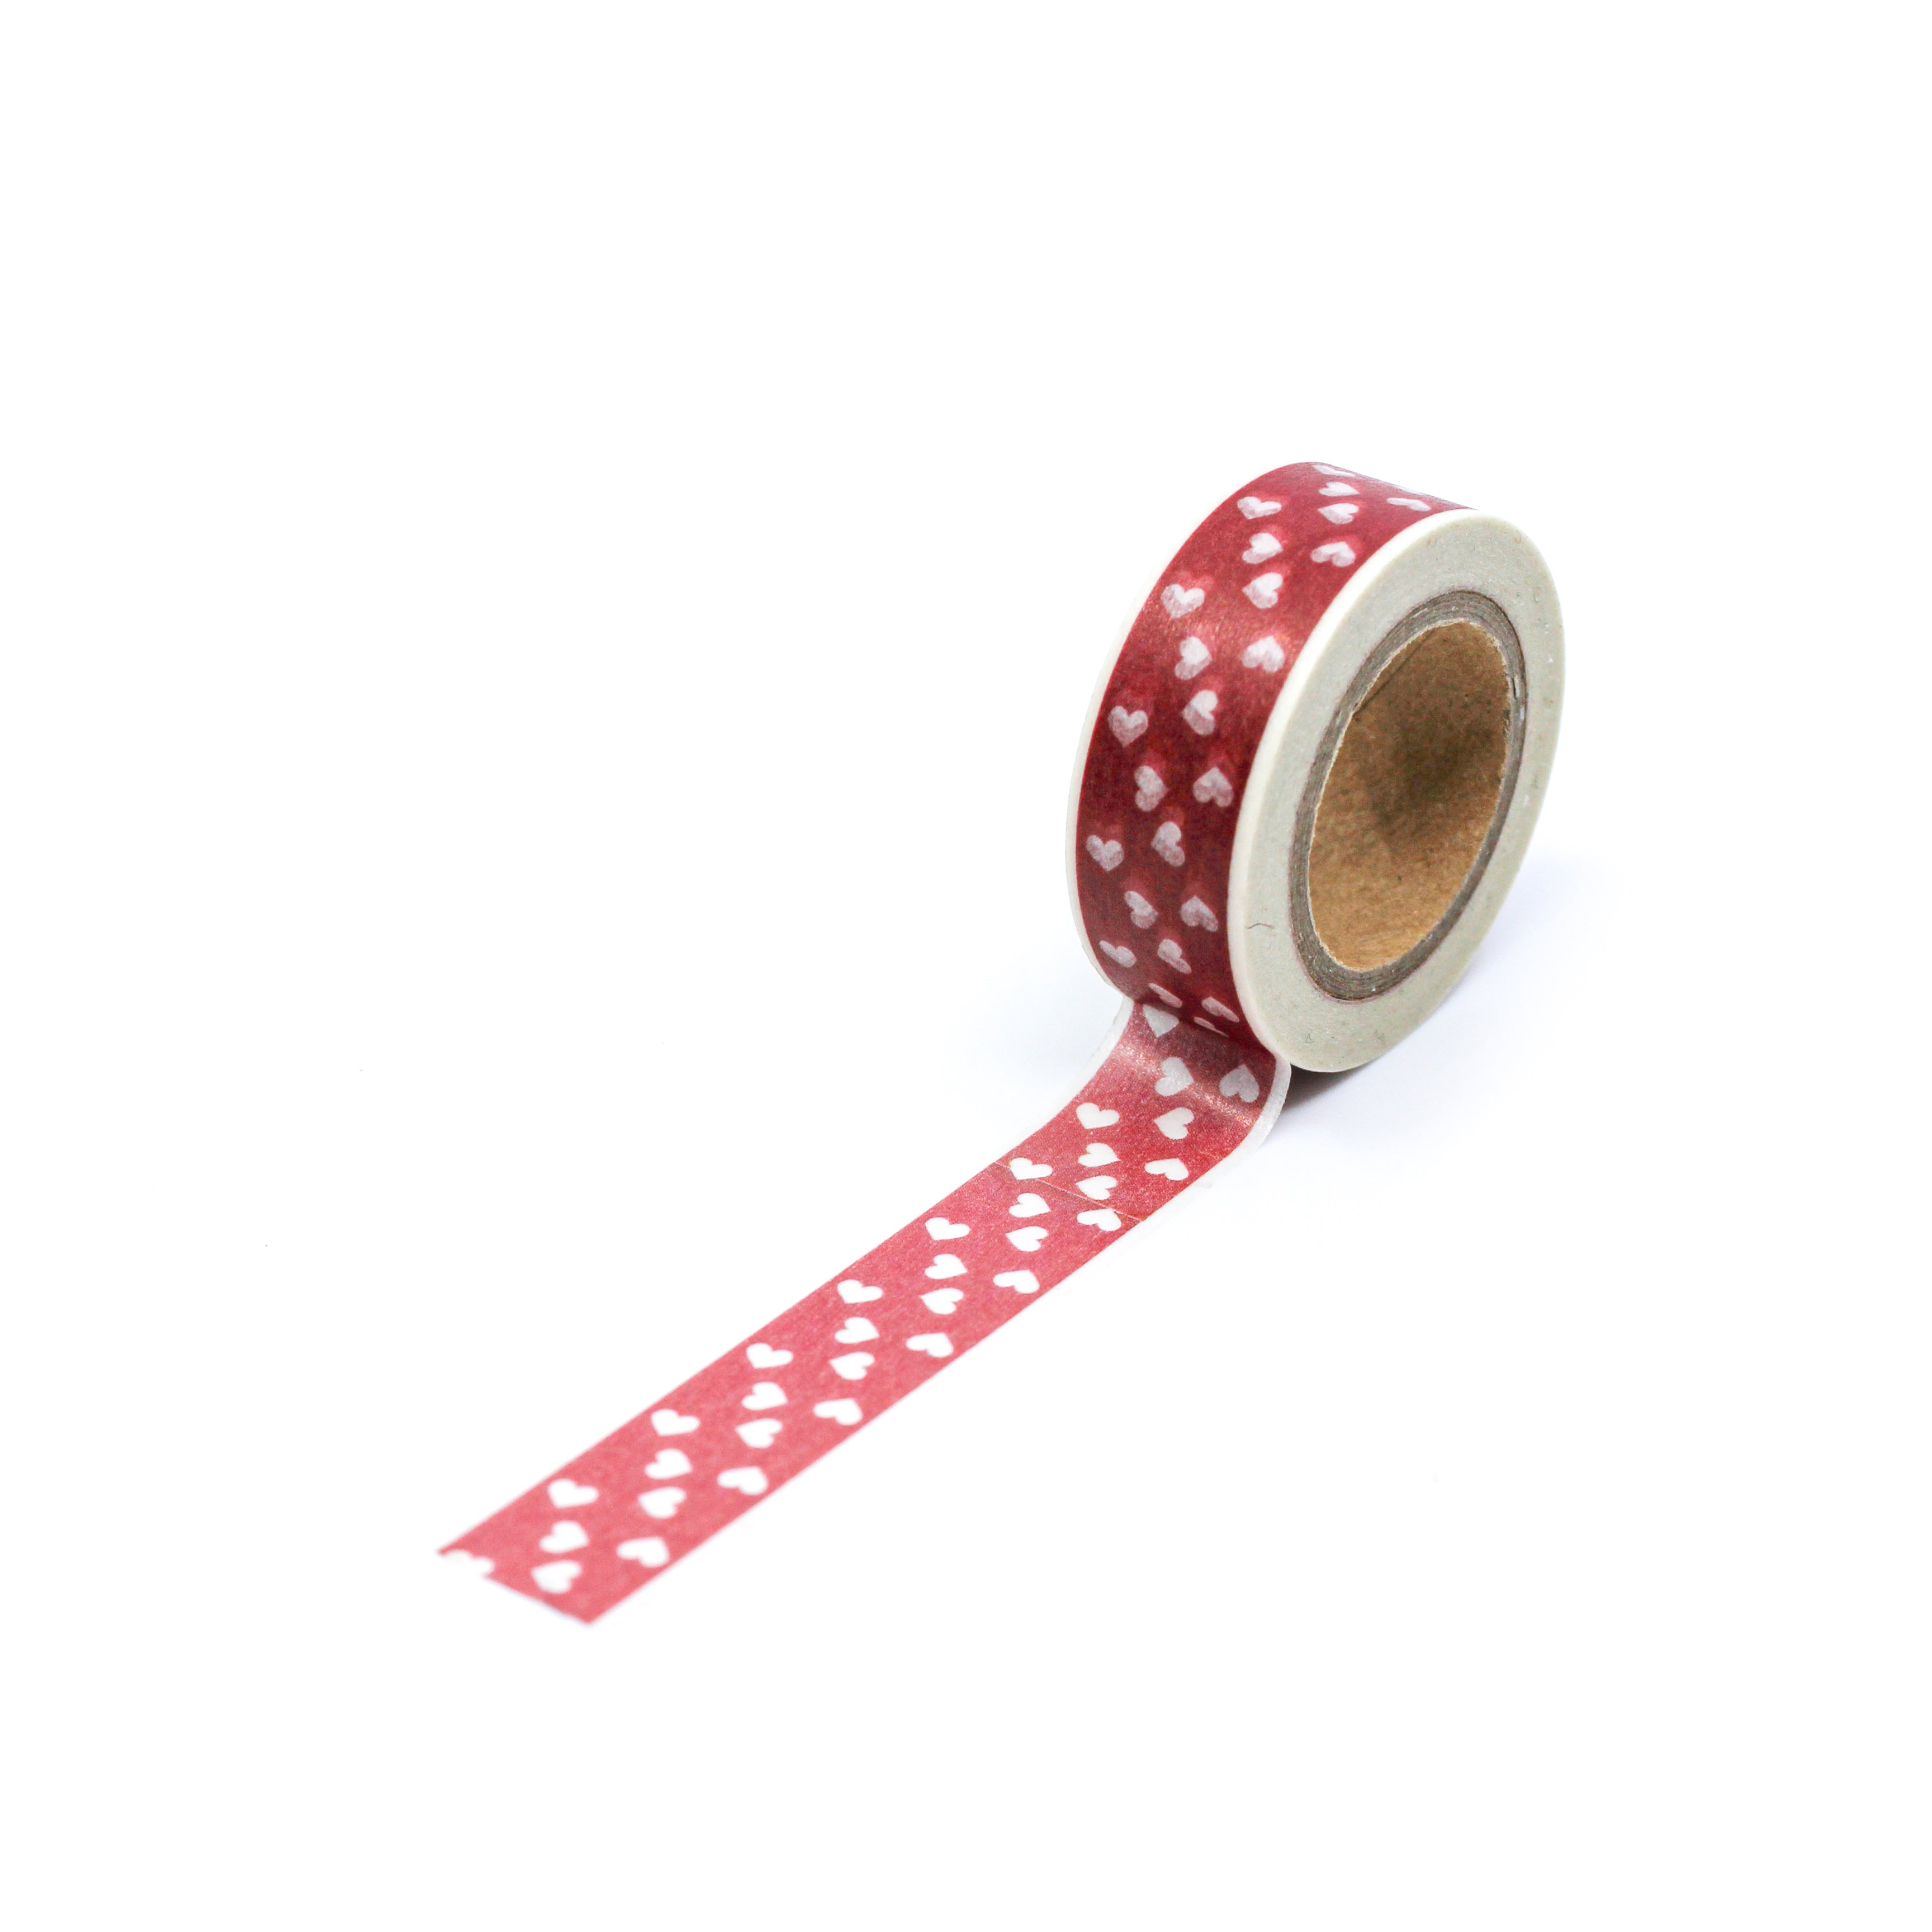 This is a full pattern repeat view of red multi hearts washi tape BBB Supplies Craft Shop